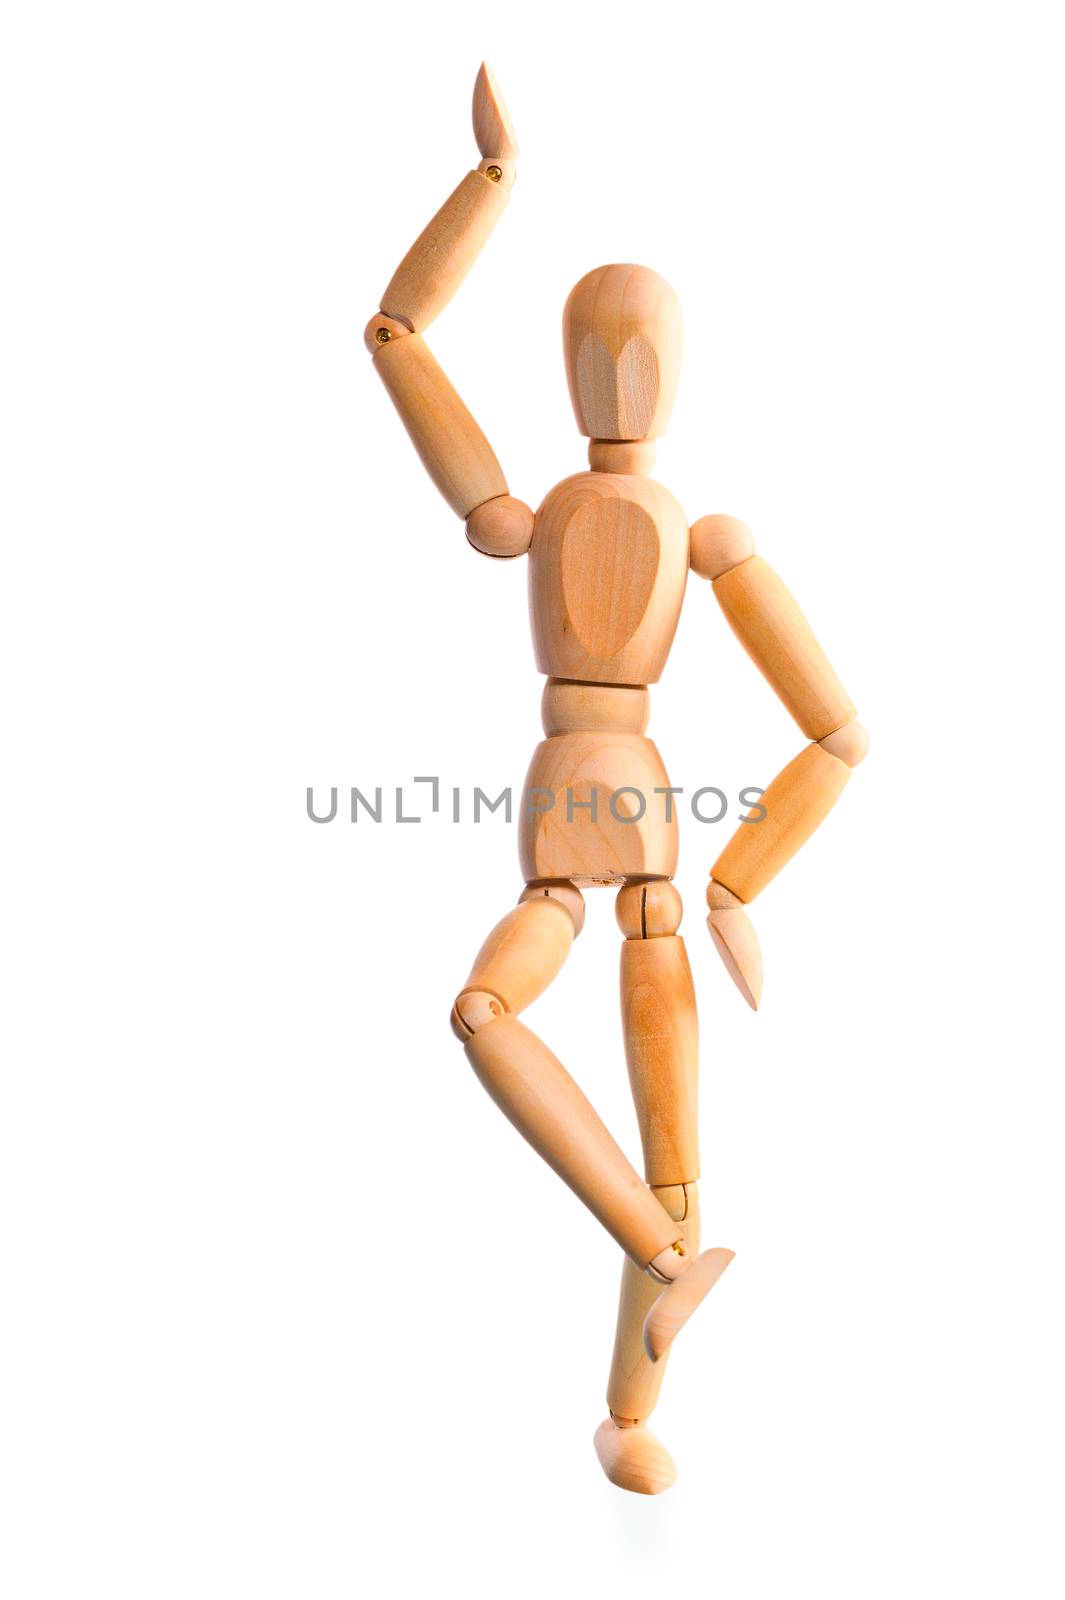 wood mannequin holds the balance on one leg by kosmsos111